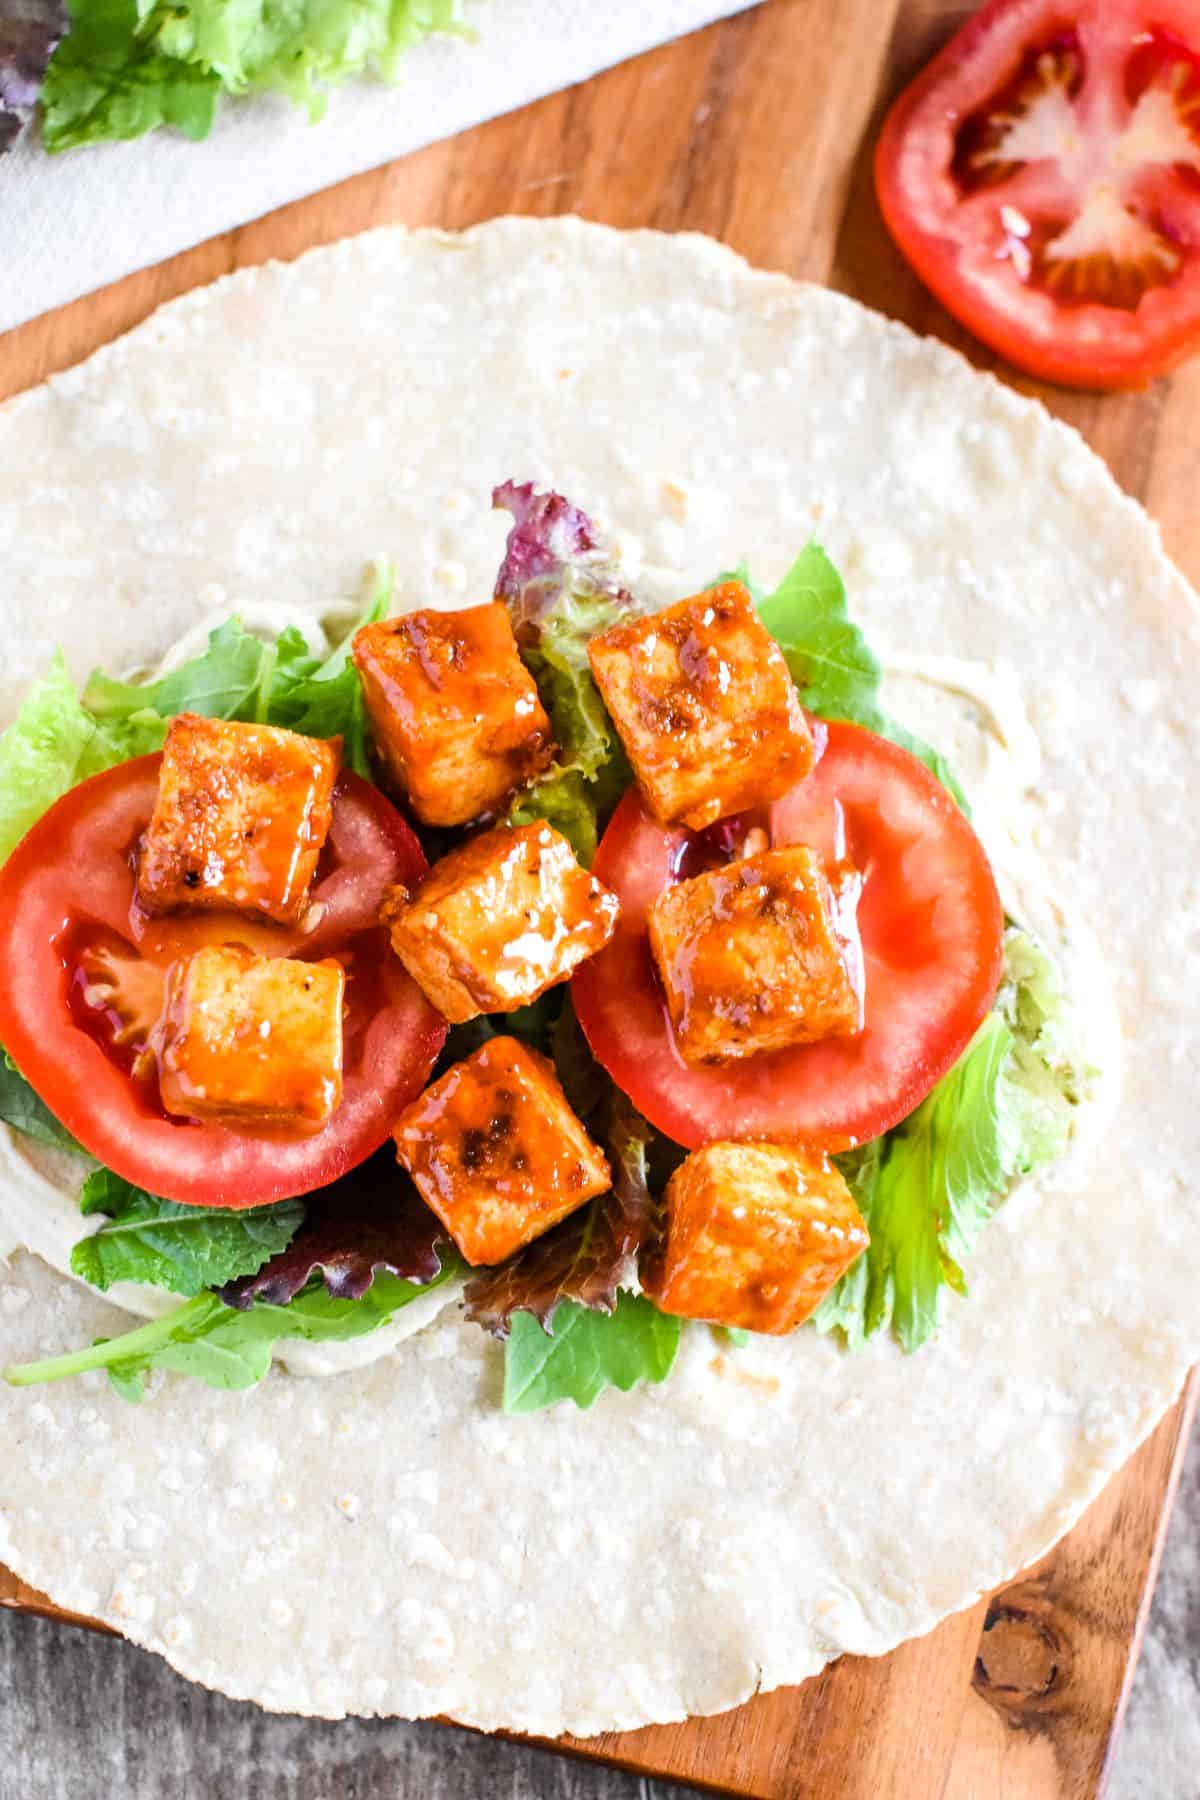 tofu in a wrap with hummus, greens and tomatoes.